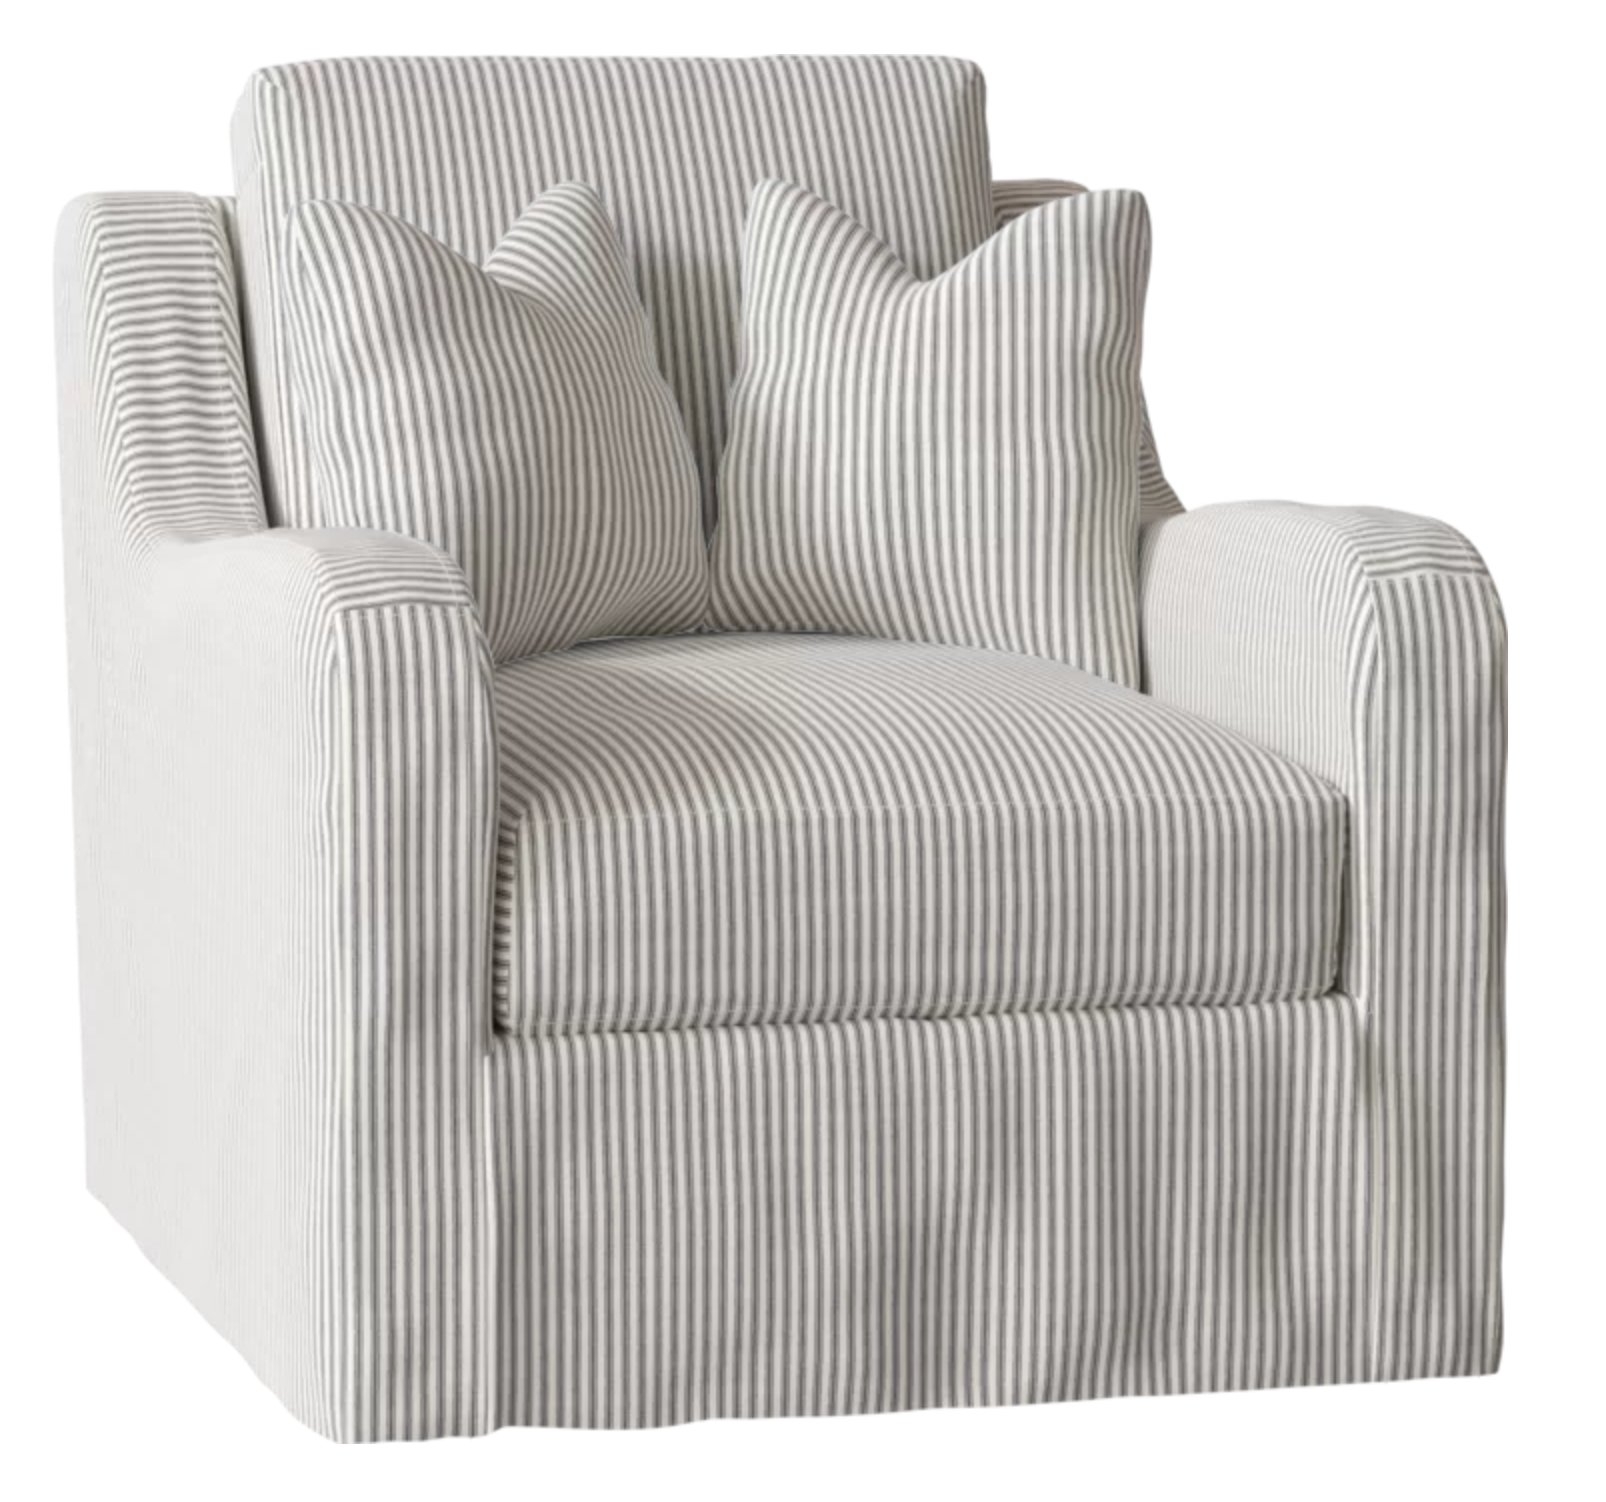 Maggie Armchair - Image 0